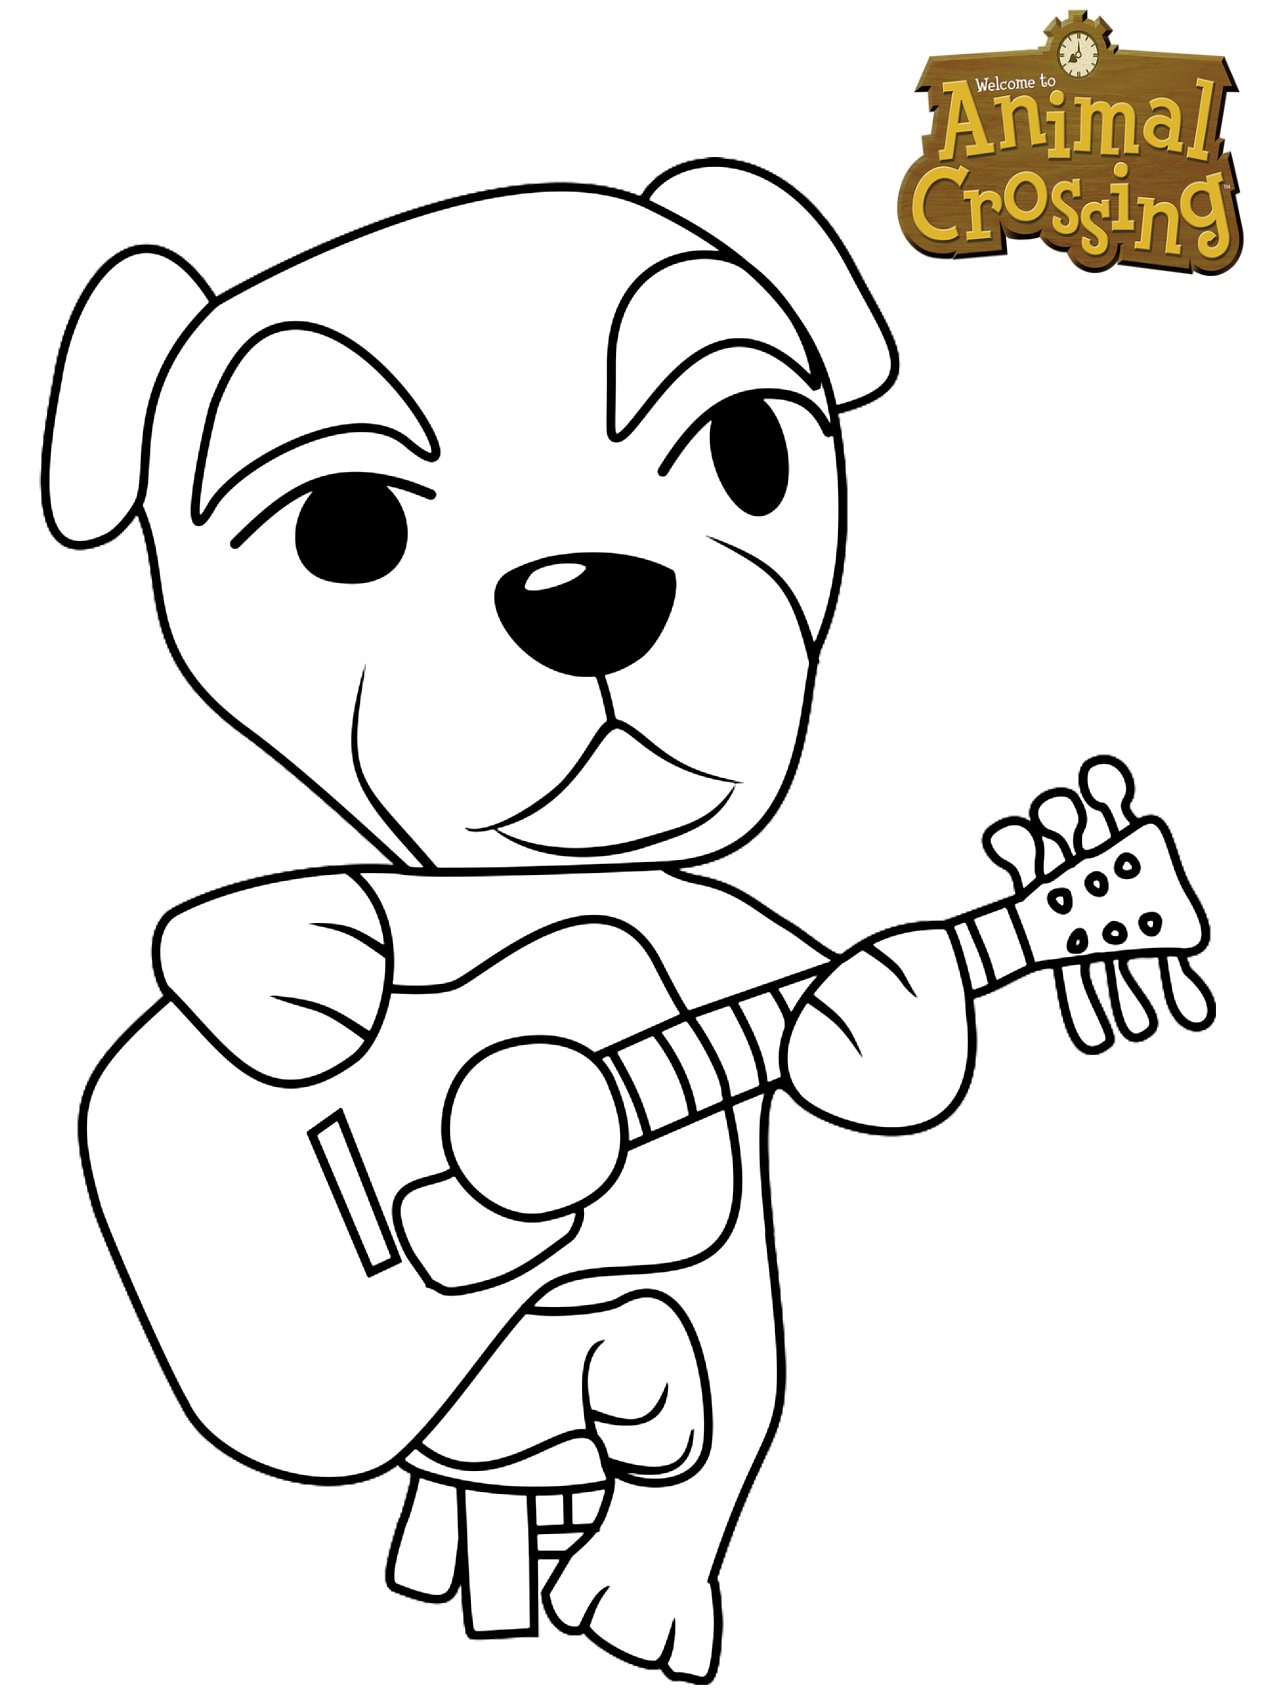 Animal Crossing Coloring Pages - Printable Animal Crossing Coloring Pages